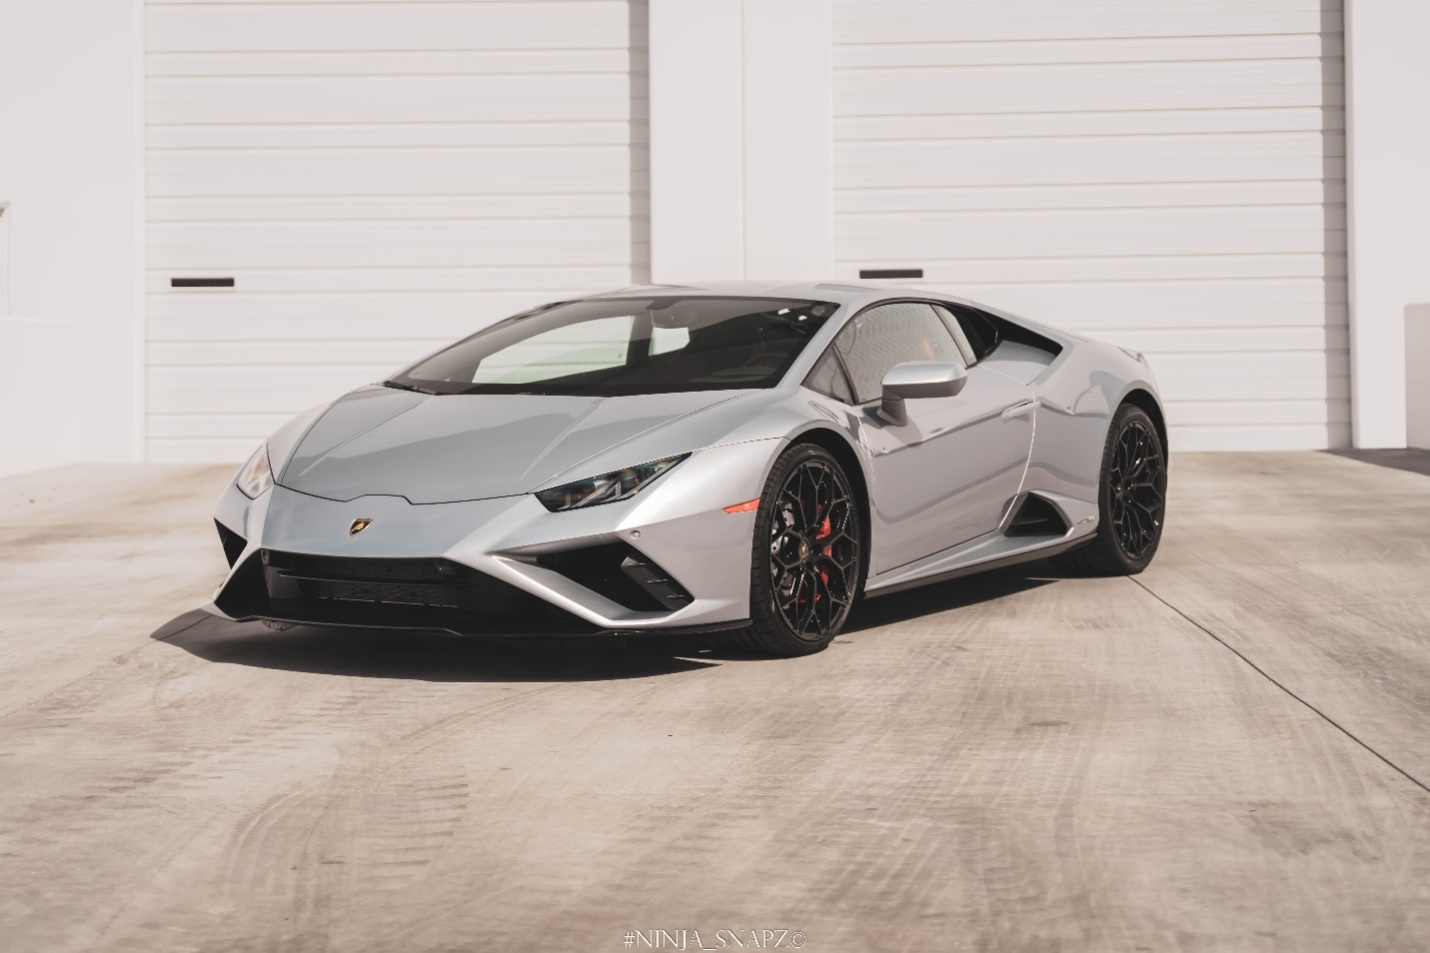 Front view of a Lamborghini Huracan Evo Coupe in the color silver